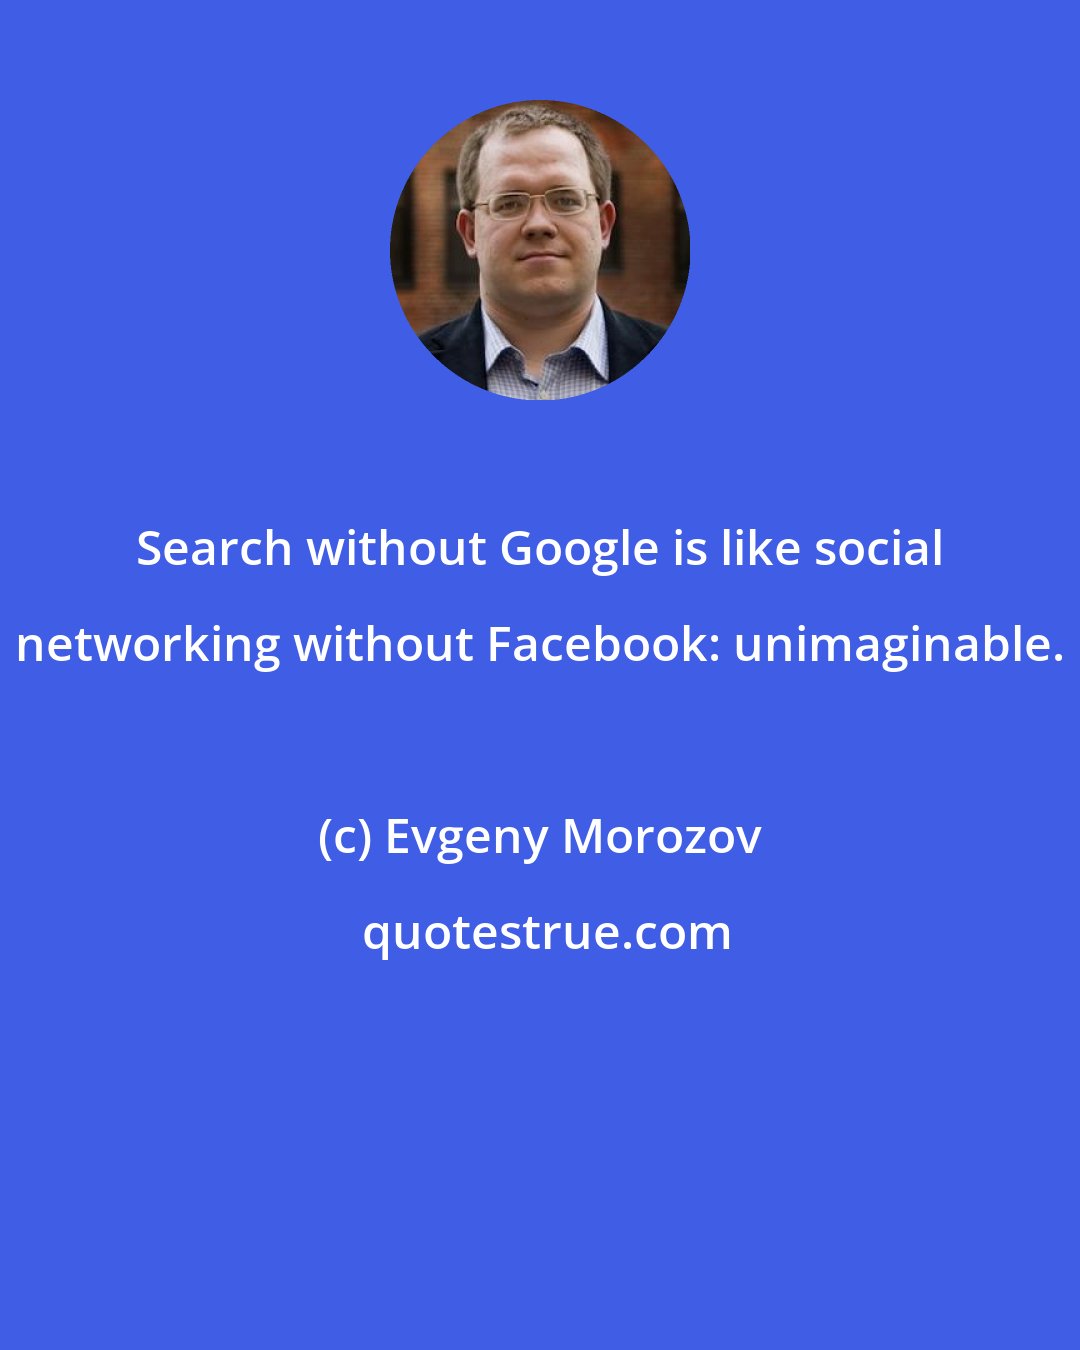 Evgeny Morozov: Search without Google is like social networking without Facebook: unimaginable.